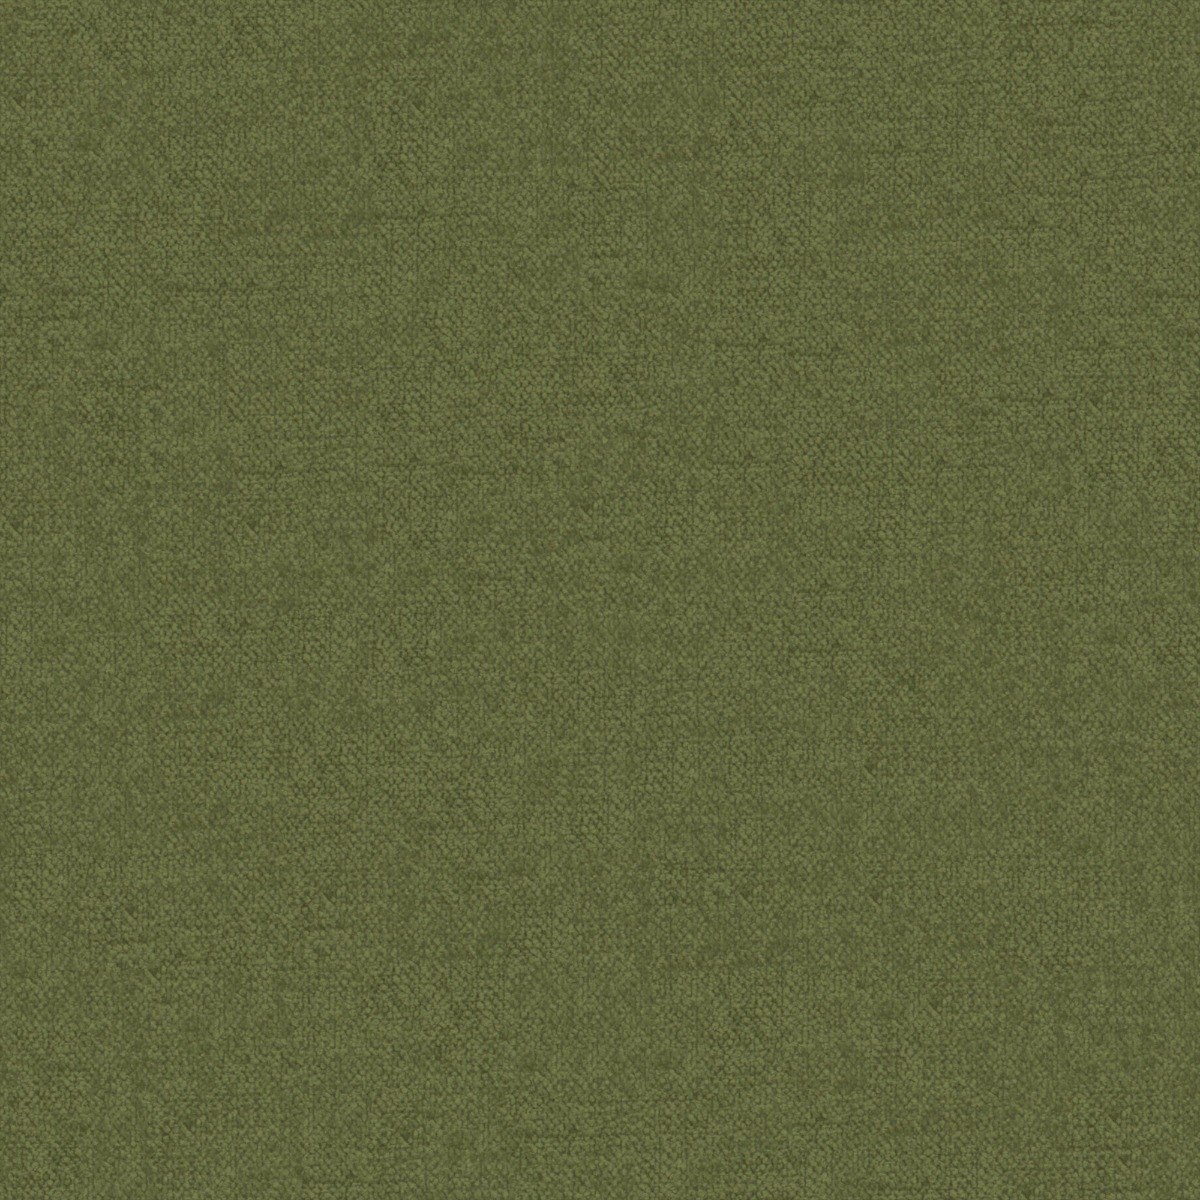 A seamless fabric texture with plain green chenille units arranged in a None pattern